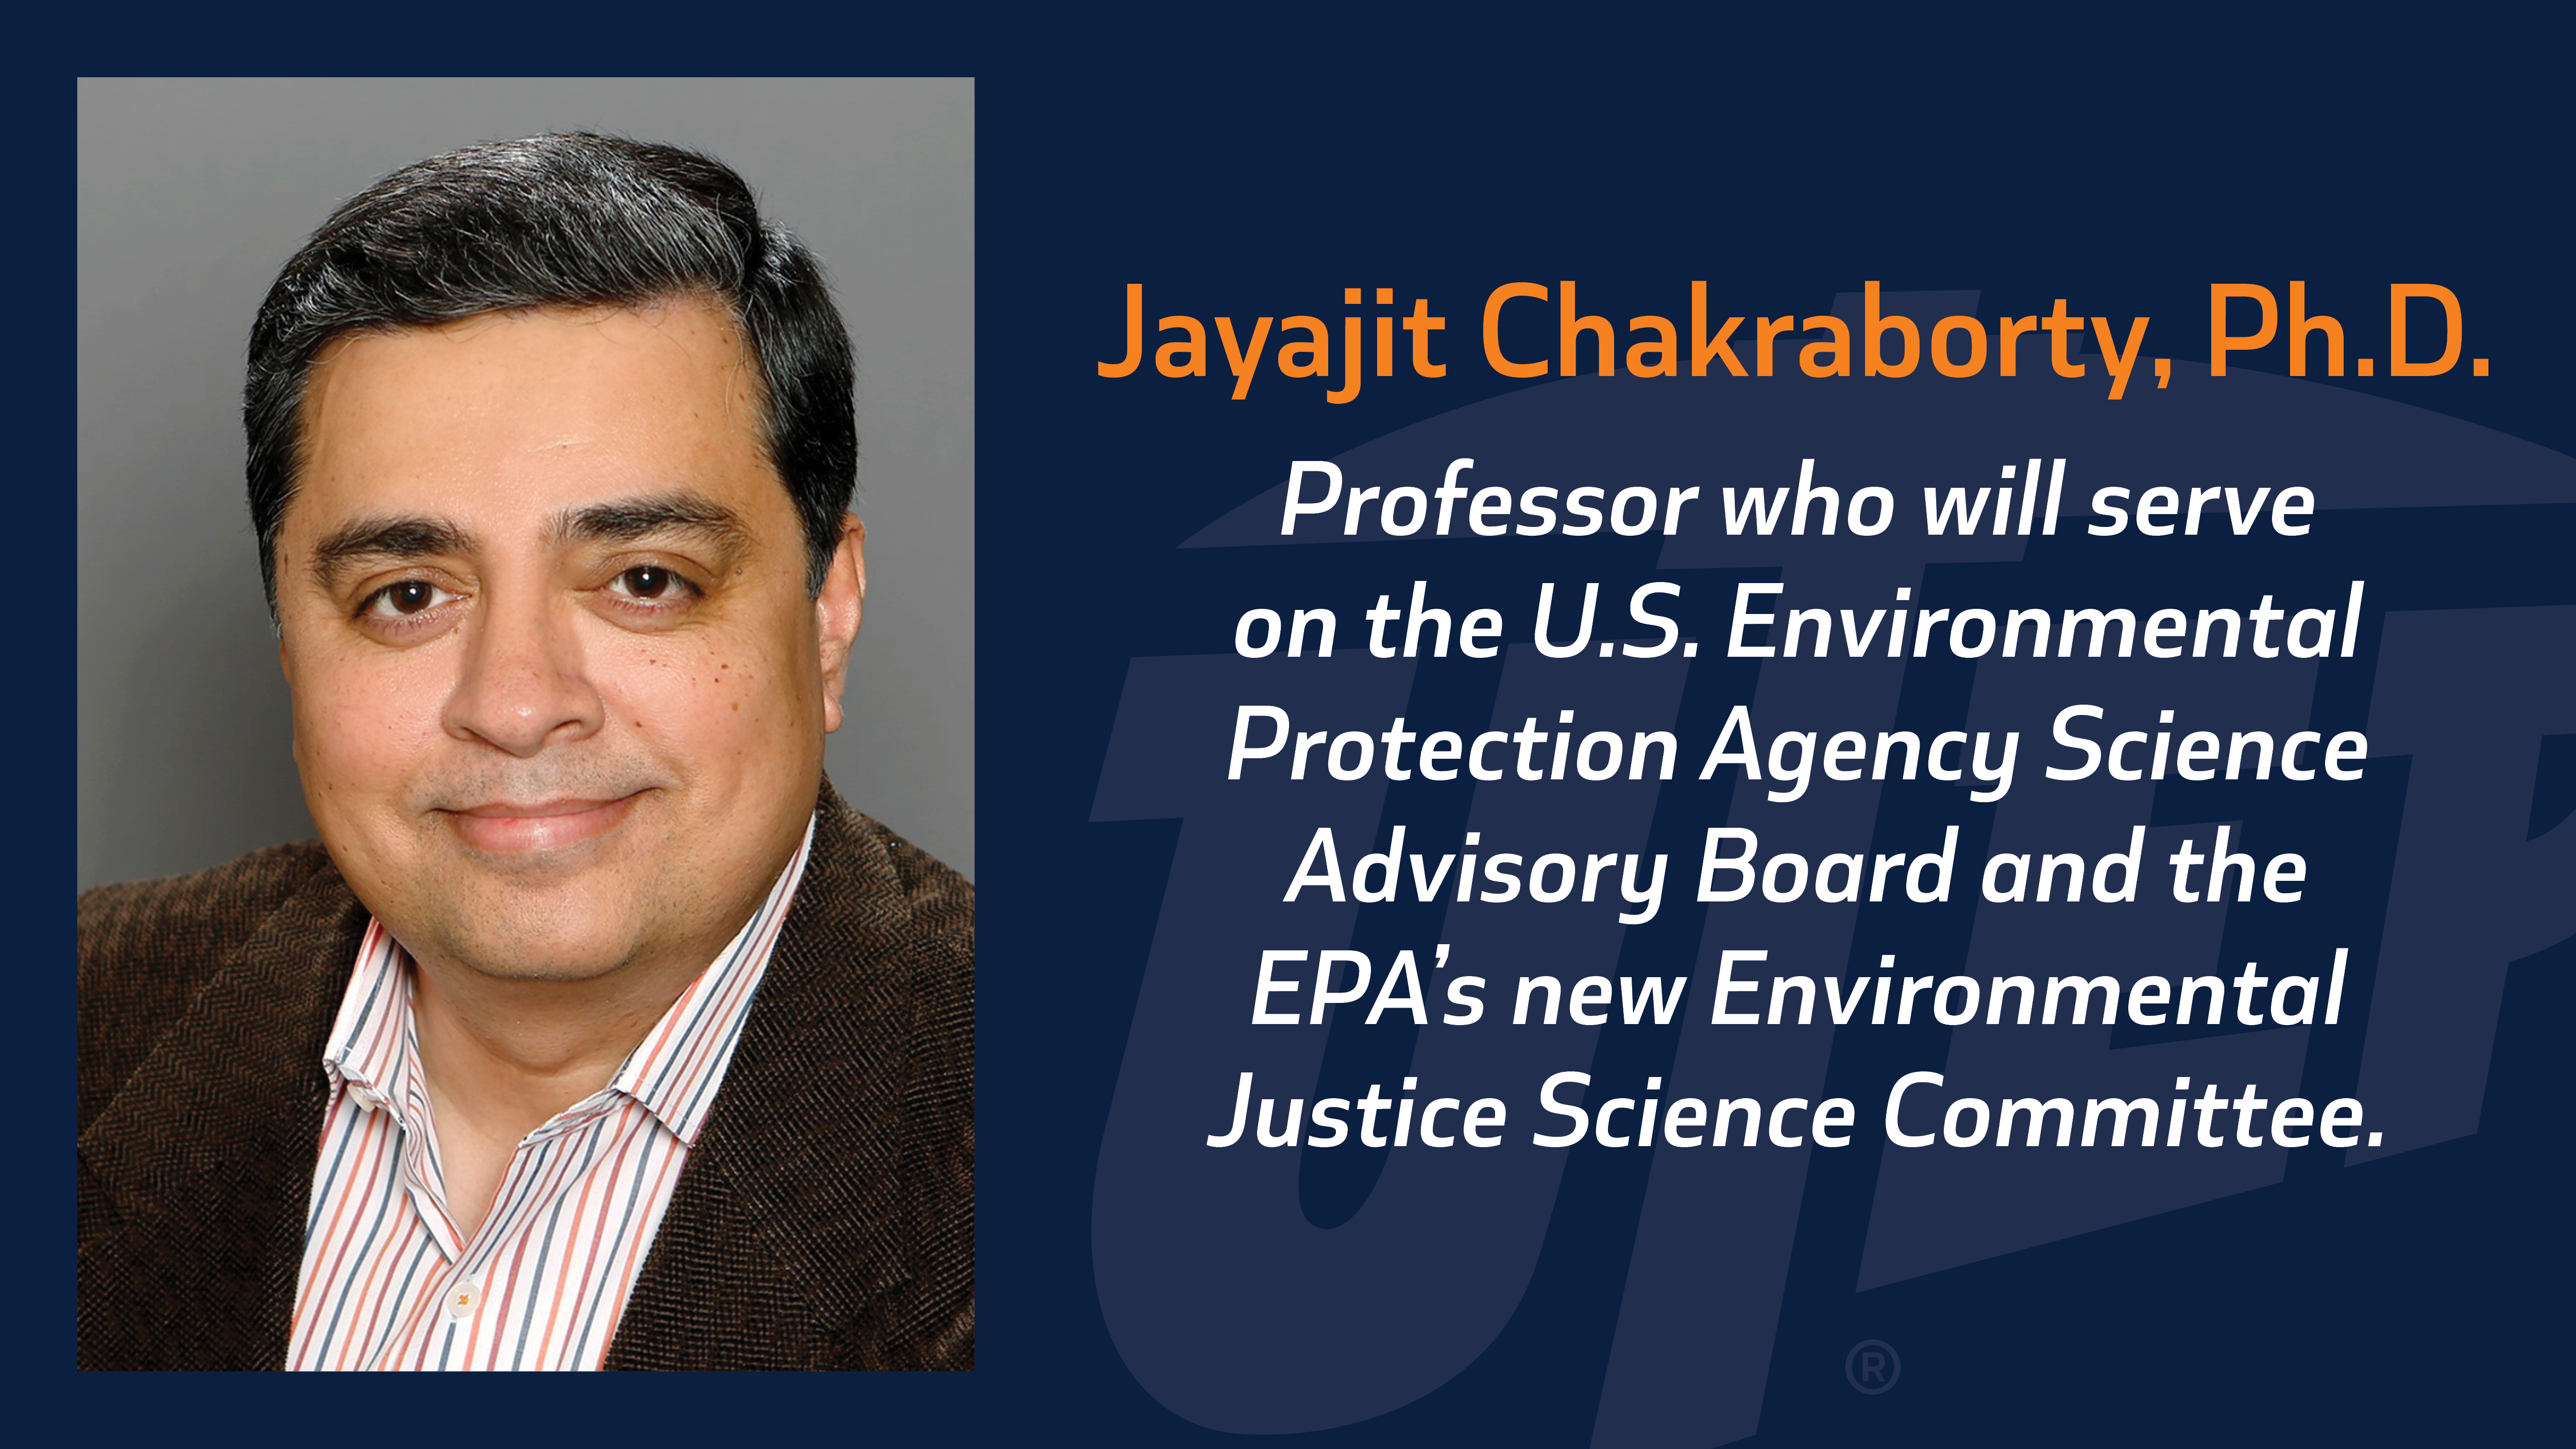 Jayajit Chakraborty, Ph.D., a professor in the Department of Sociology and Anthropology, and the founding director of The University of Texas at El Paso's Socio-Environmental and Geospatial Analysis Lab, will serve on the U.S. Environmental Protection Agency Science Advisory Board and the EPA’s new Environmental Justice Science Committee. His three-year term begins Sept. 26, 2021. 